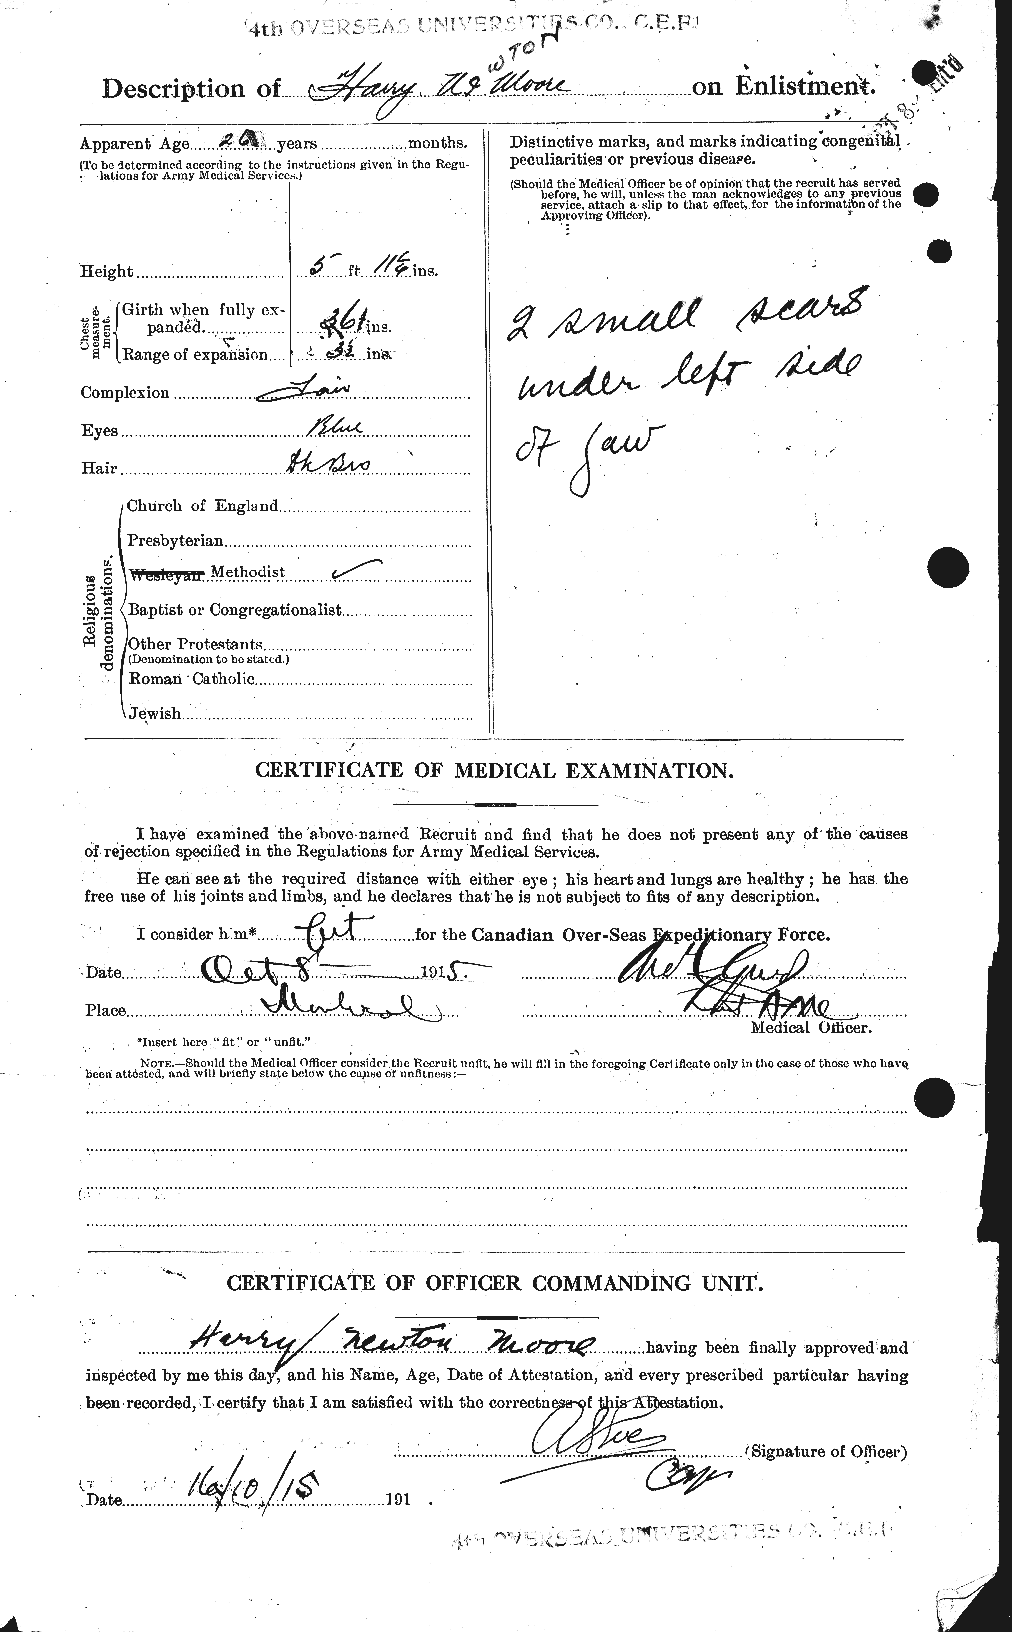 Personnel Records of the First World War - CEF 502088b